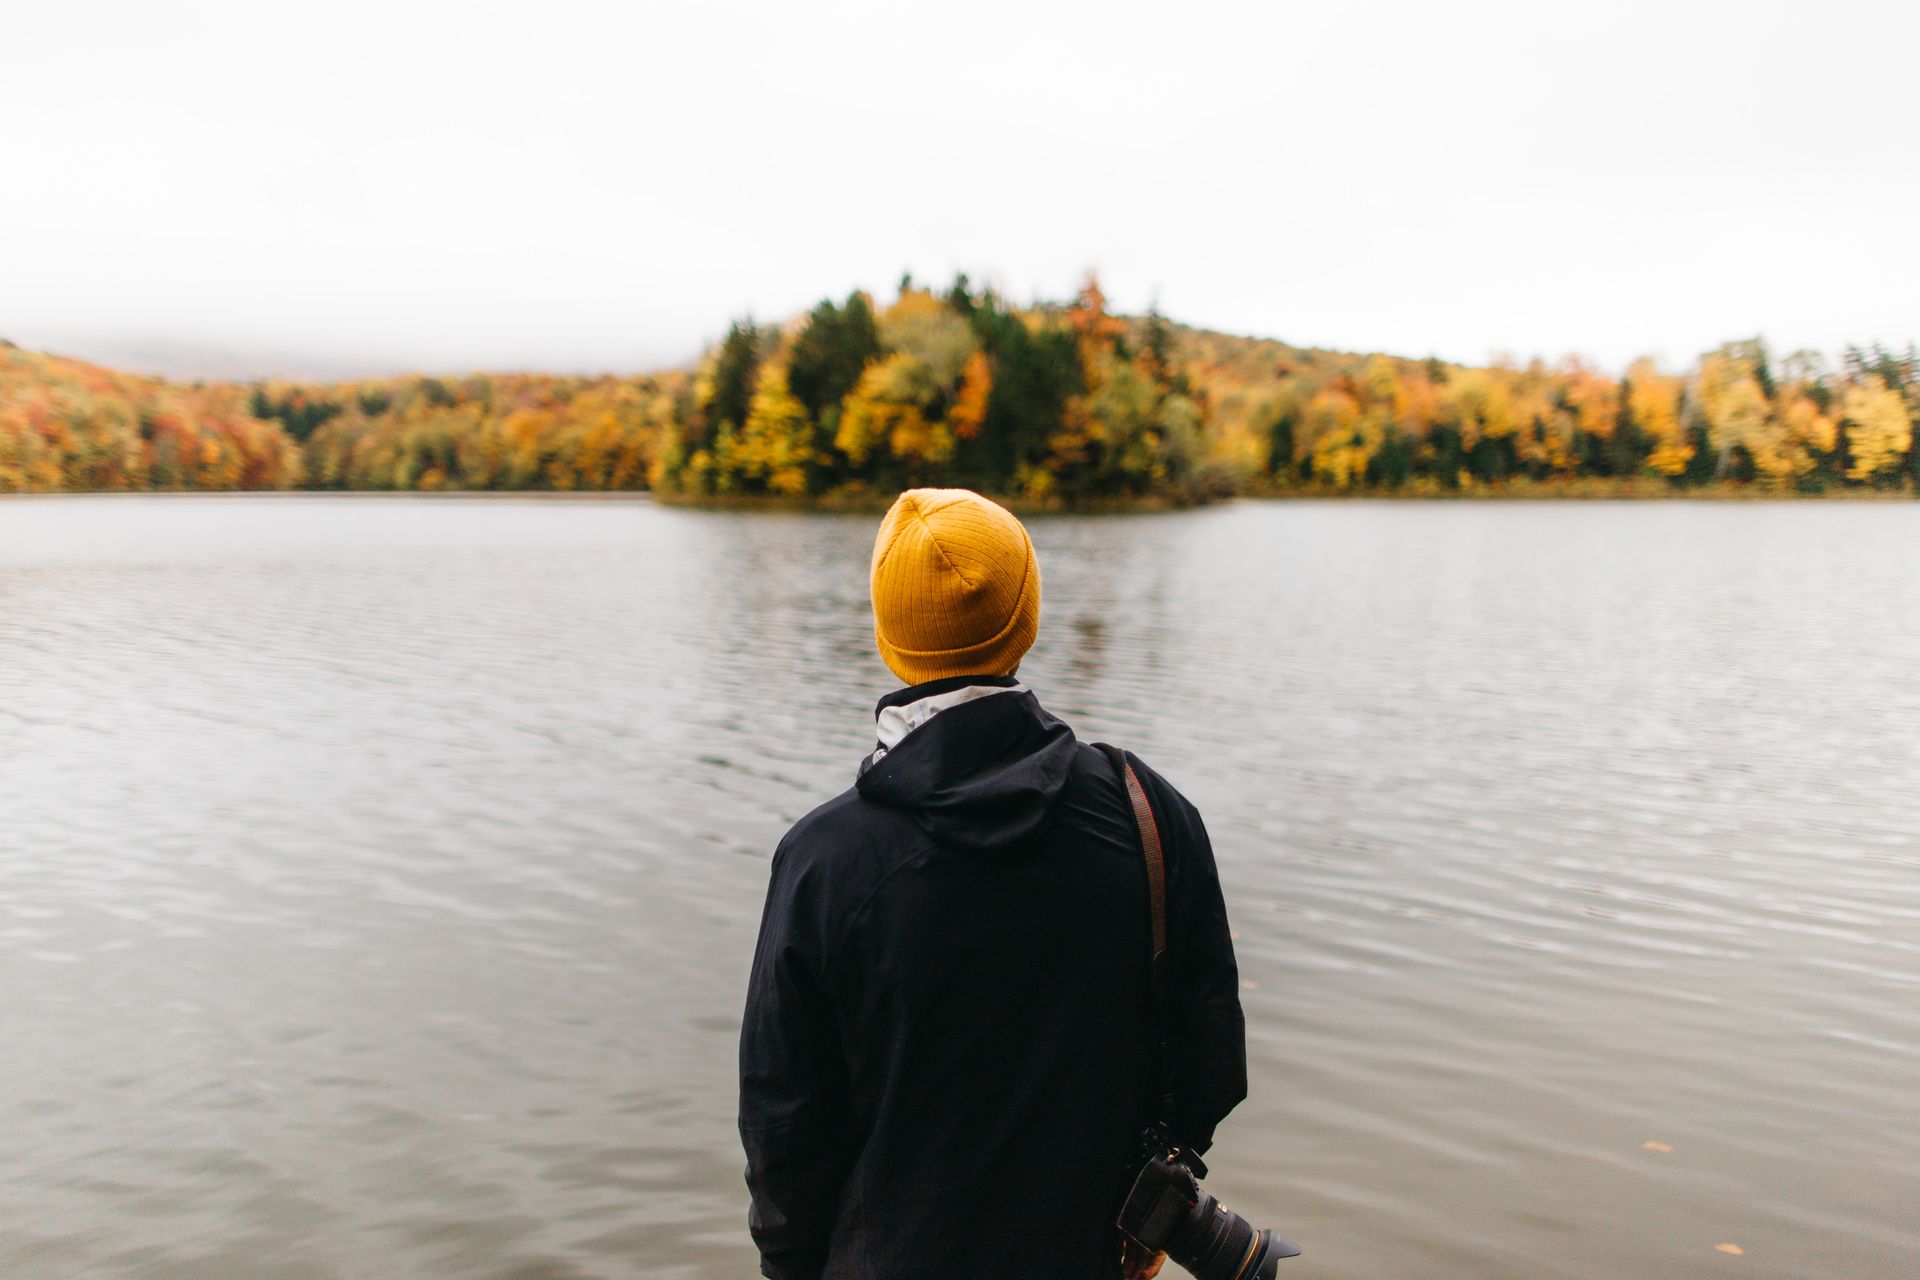 A man in a yellow hat is standing in front of a lake